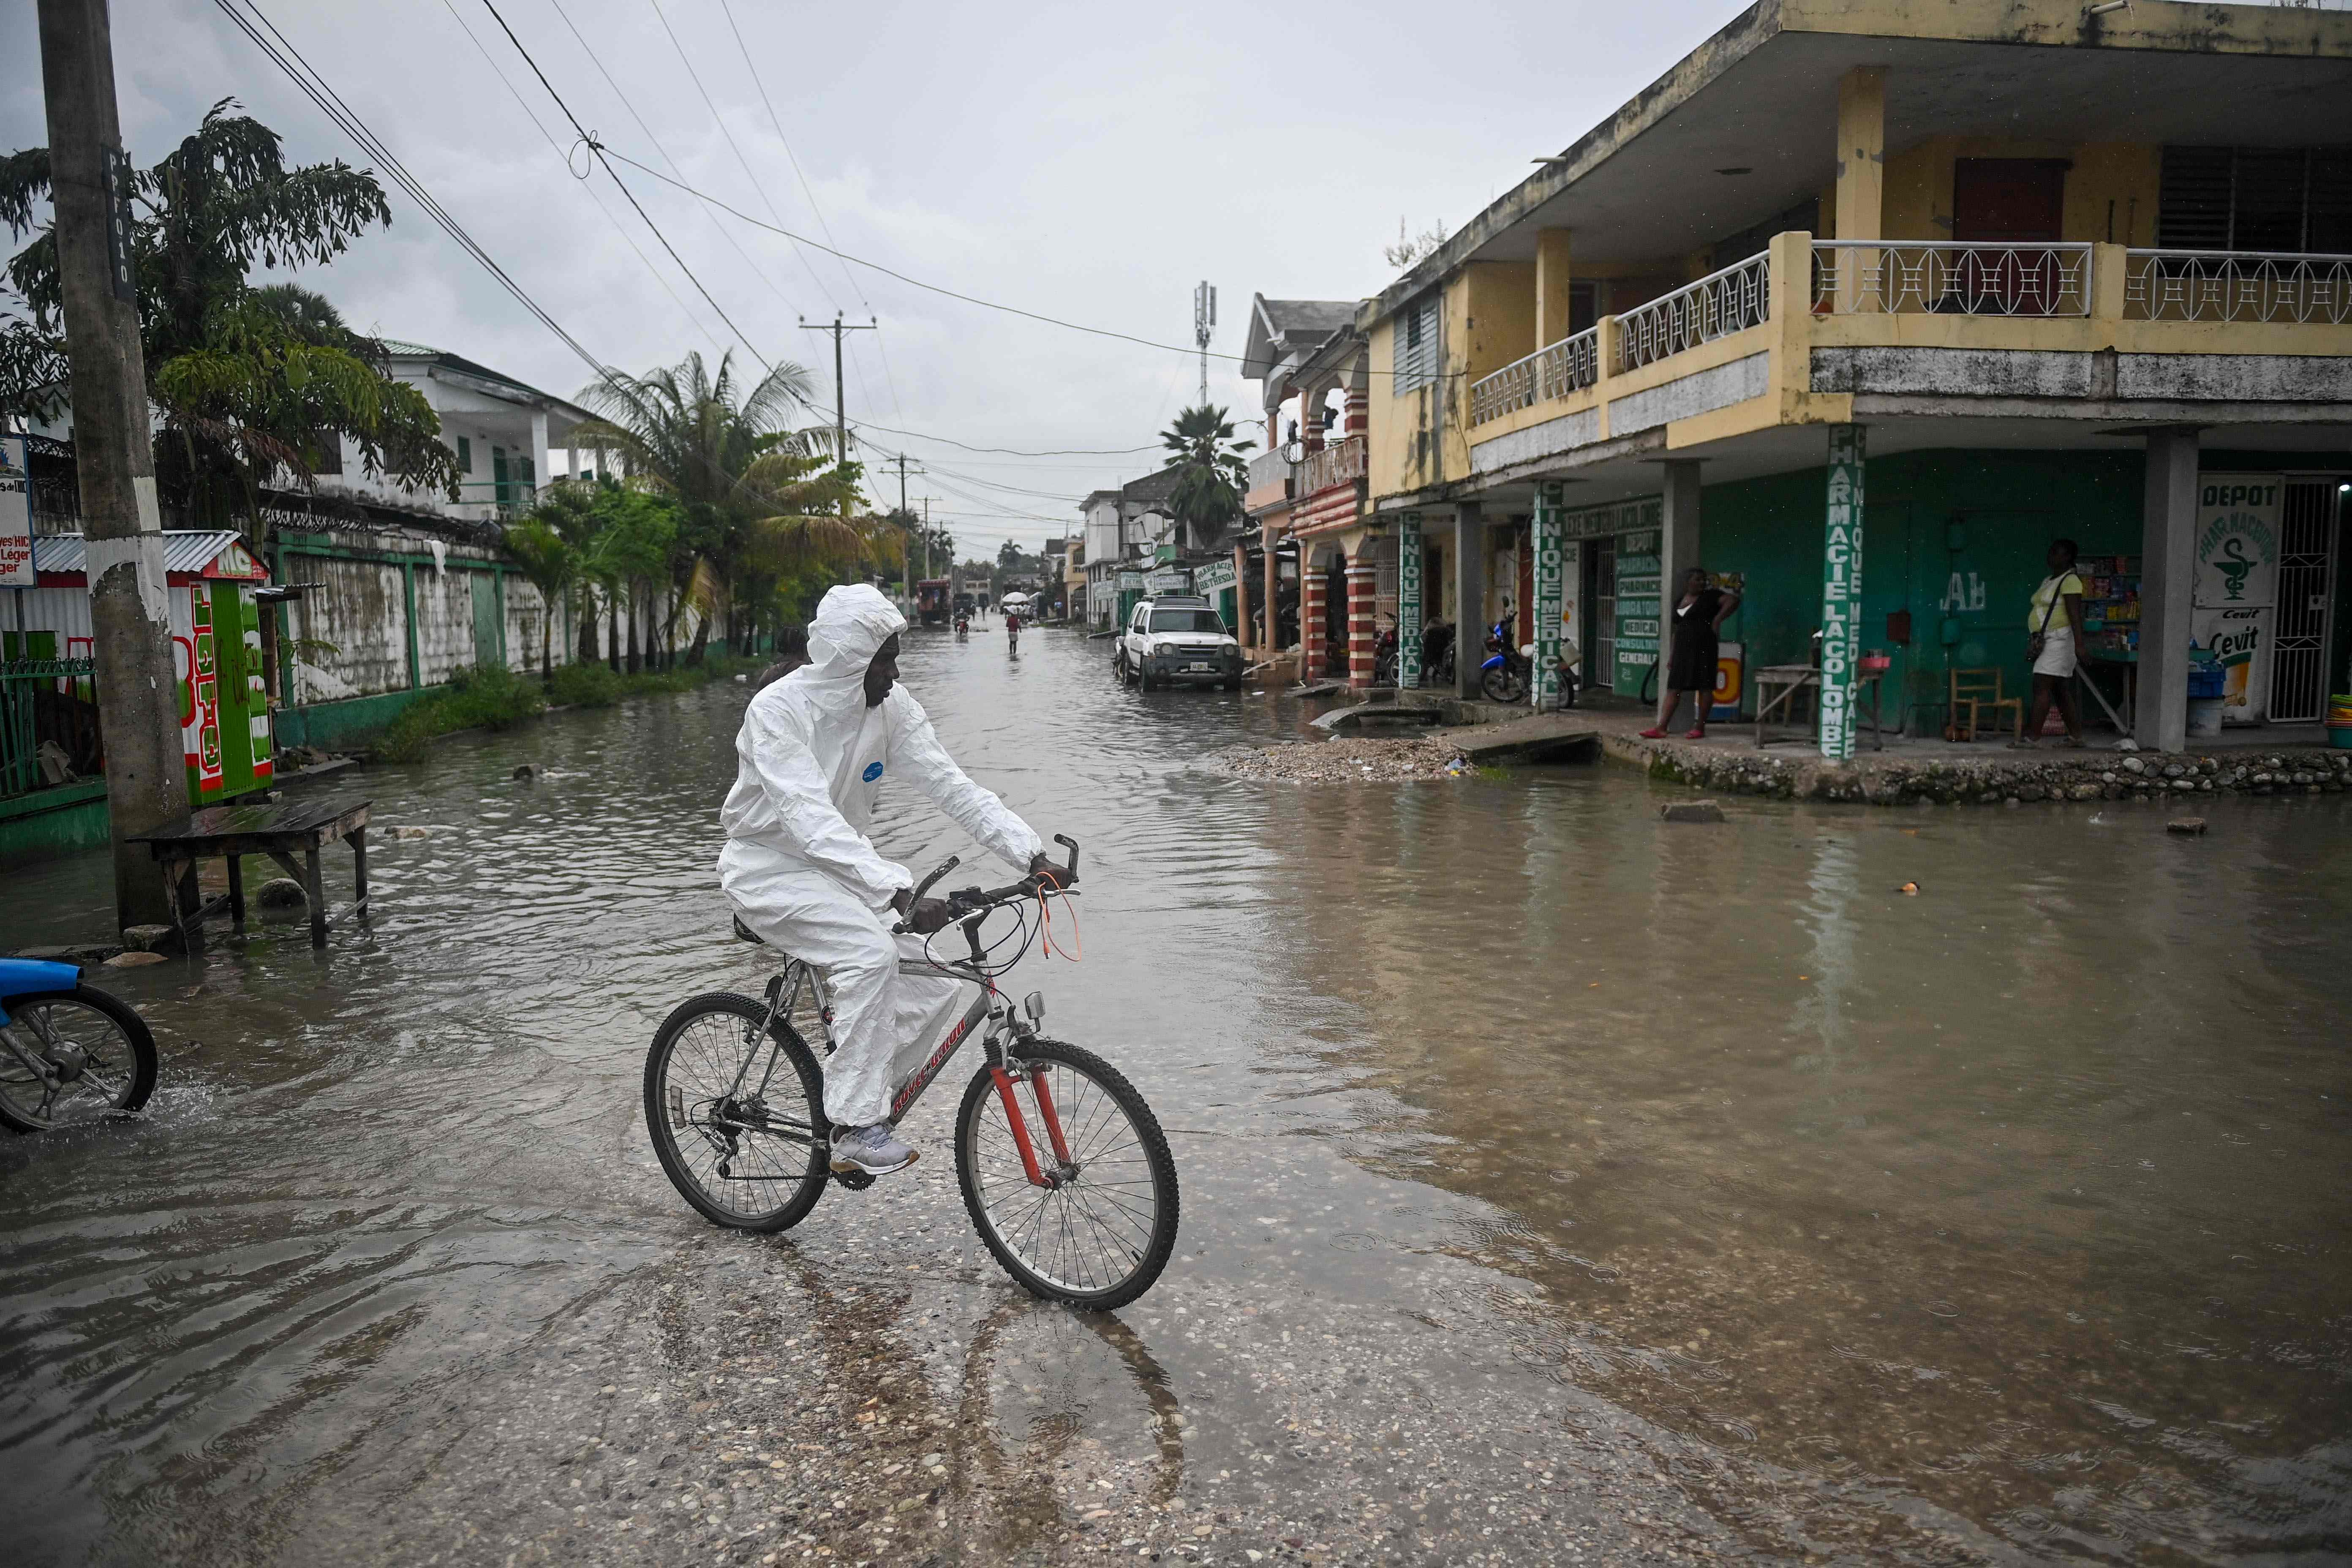 A man rides his bicycle through a flooded neighborhood in Les Cayes. AFP